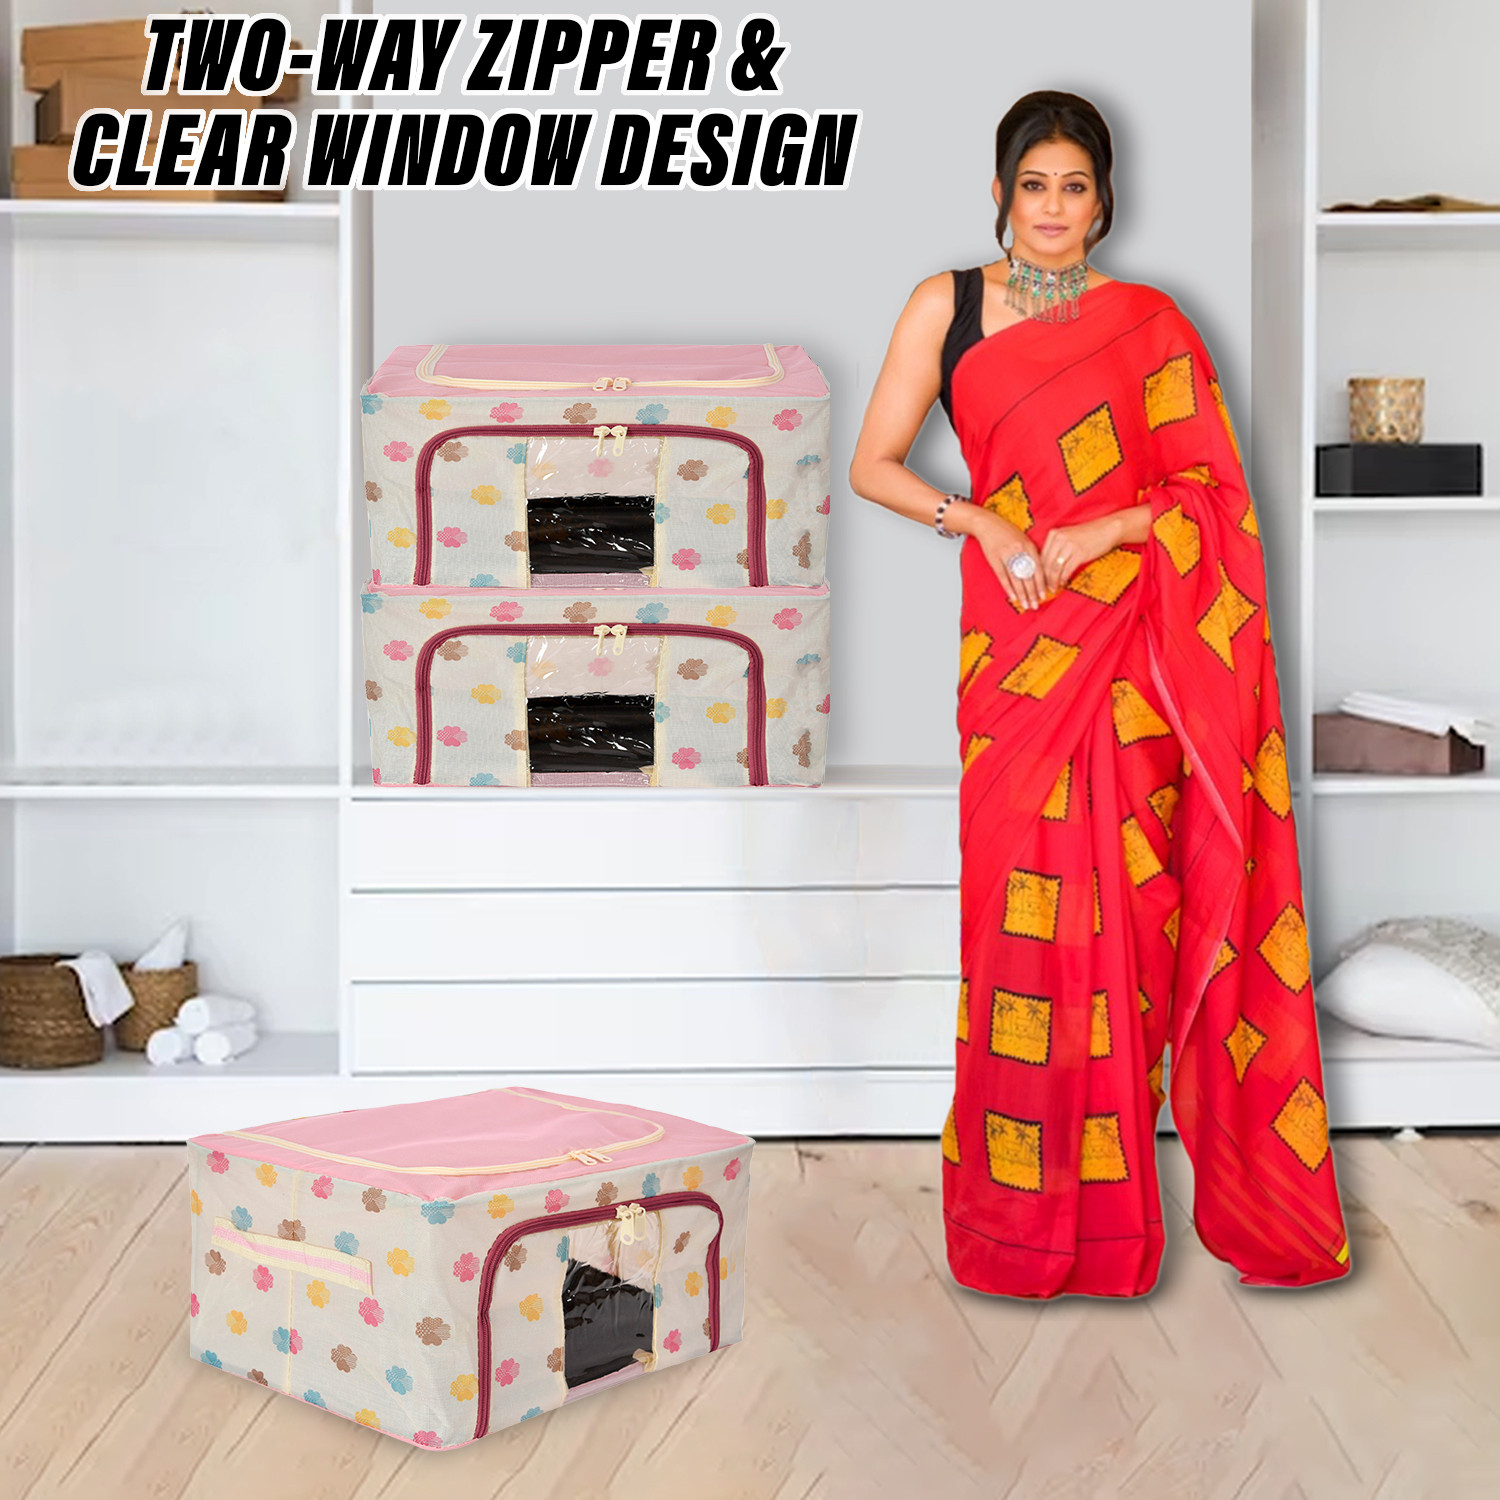 Kuber Industries Storage Box | Steel Frame Living Box | Storage Organizer For Clothes | Saree Cover for Woman | Multi Flower Print Cloth Organizer | 22 Liter | Pink